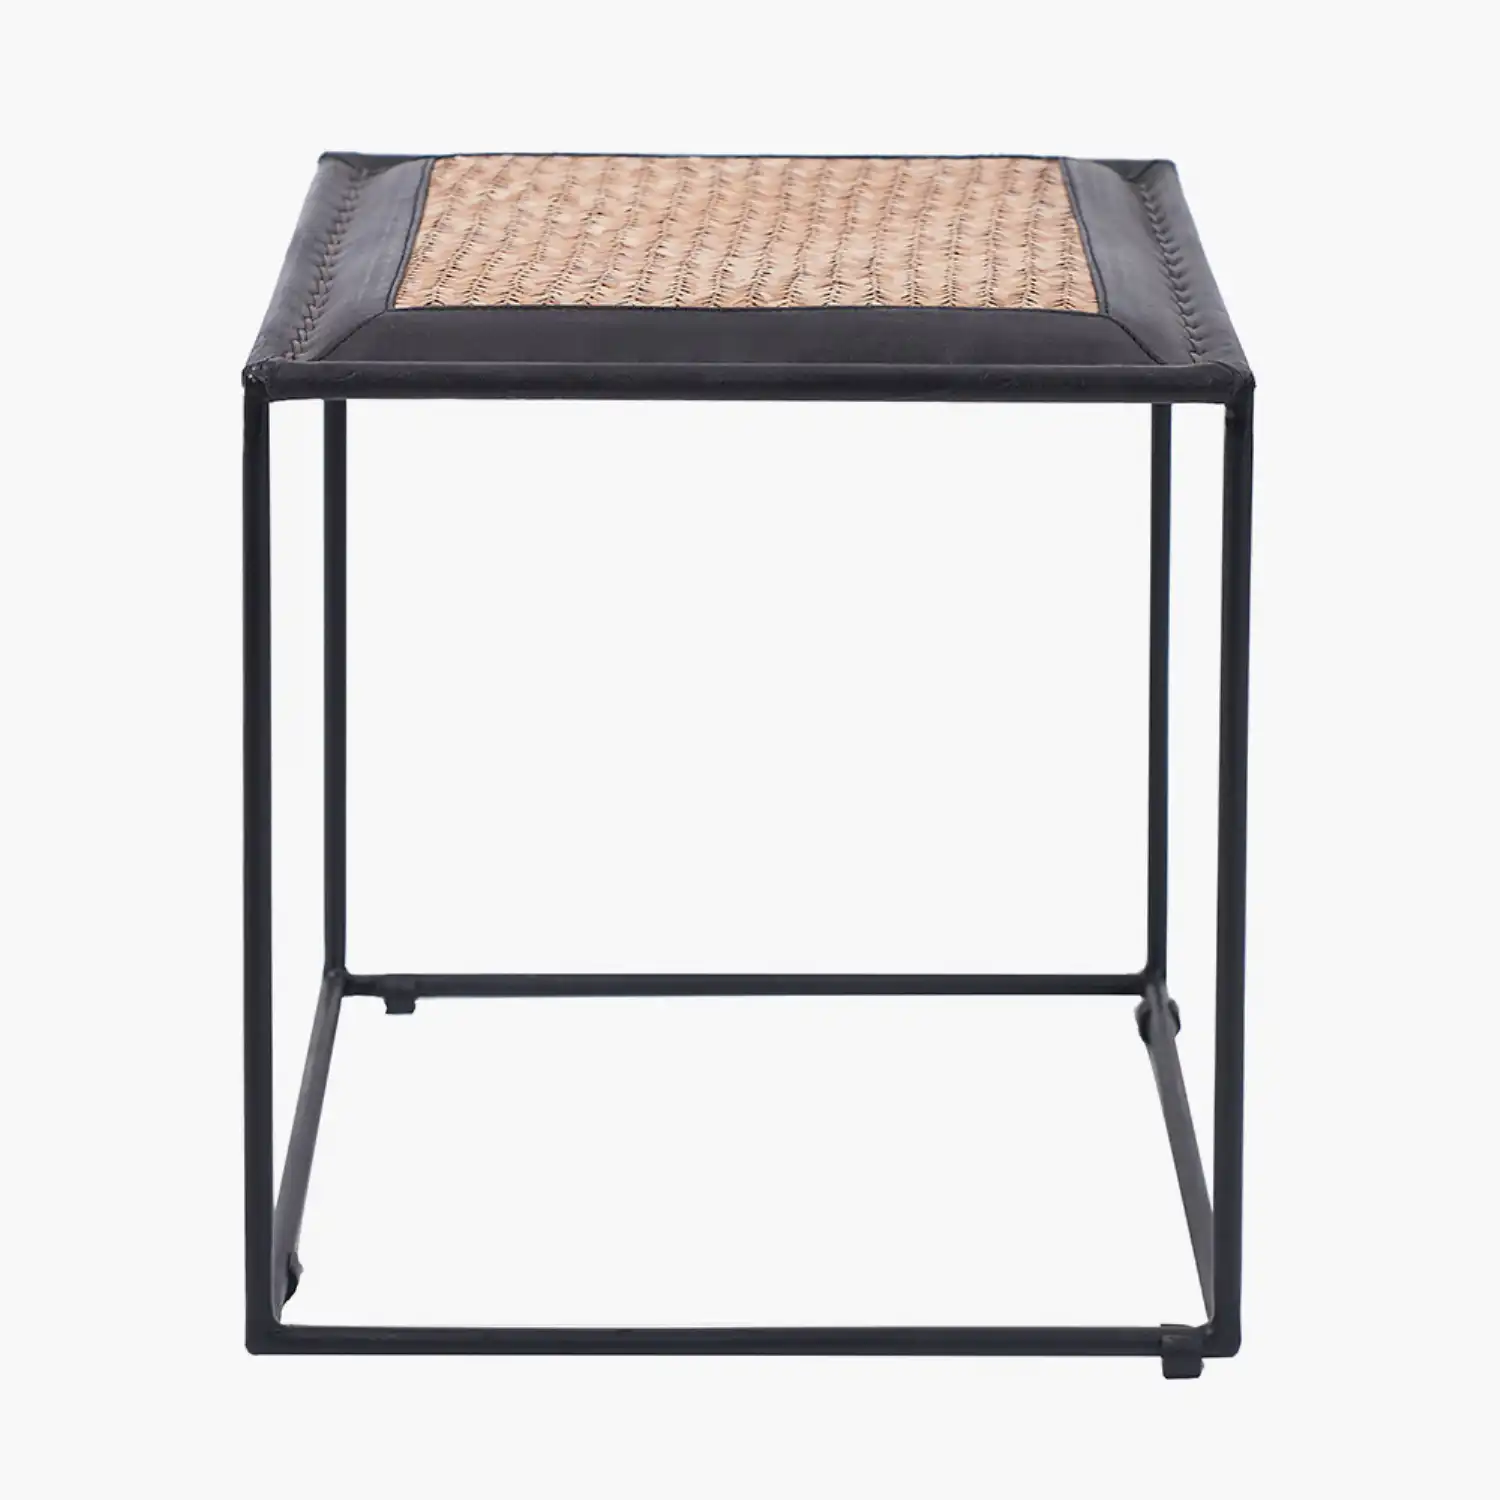 Black Leather, Woven Rattan and Iron Stool